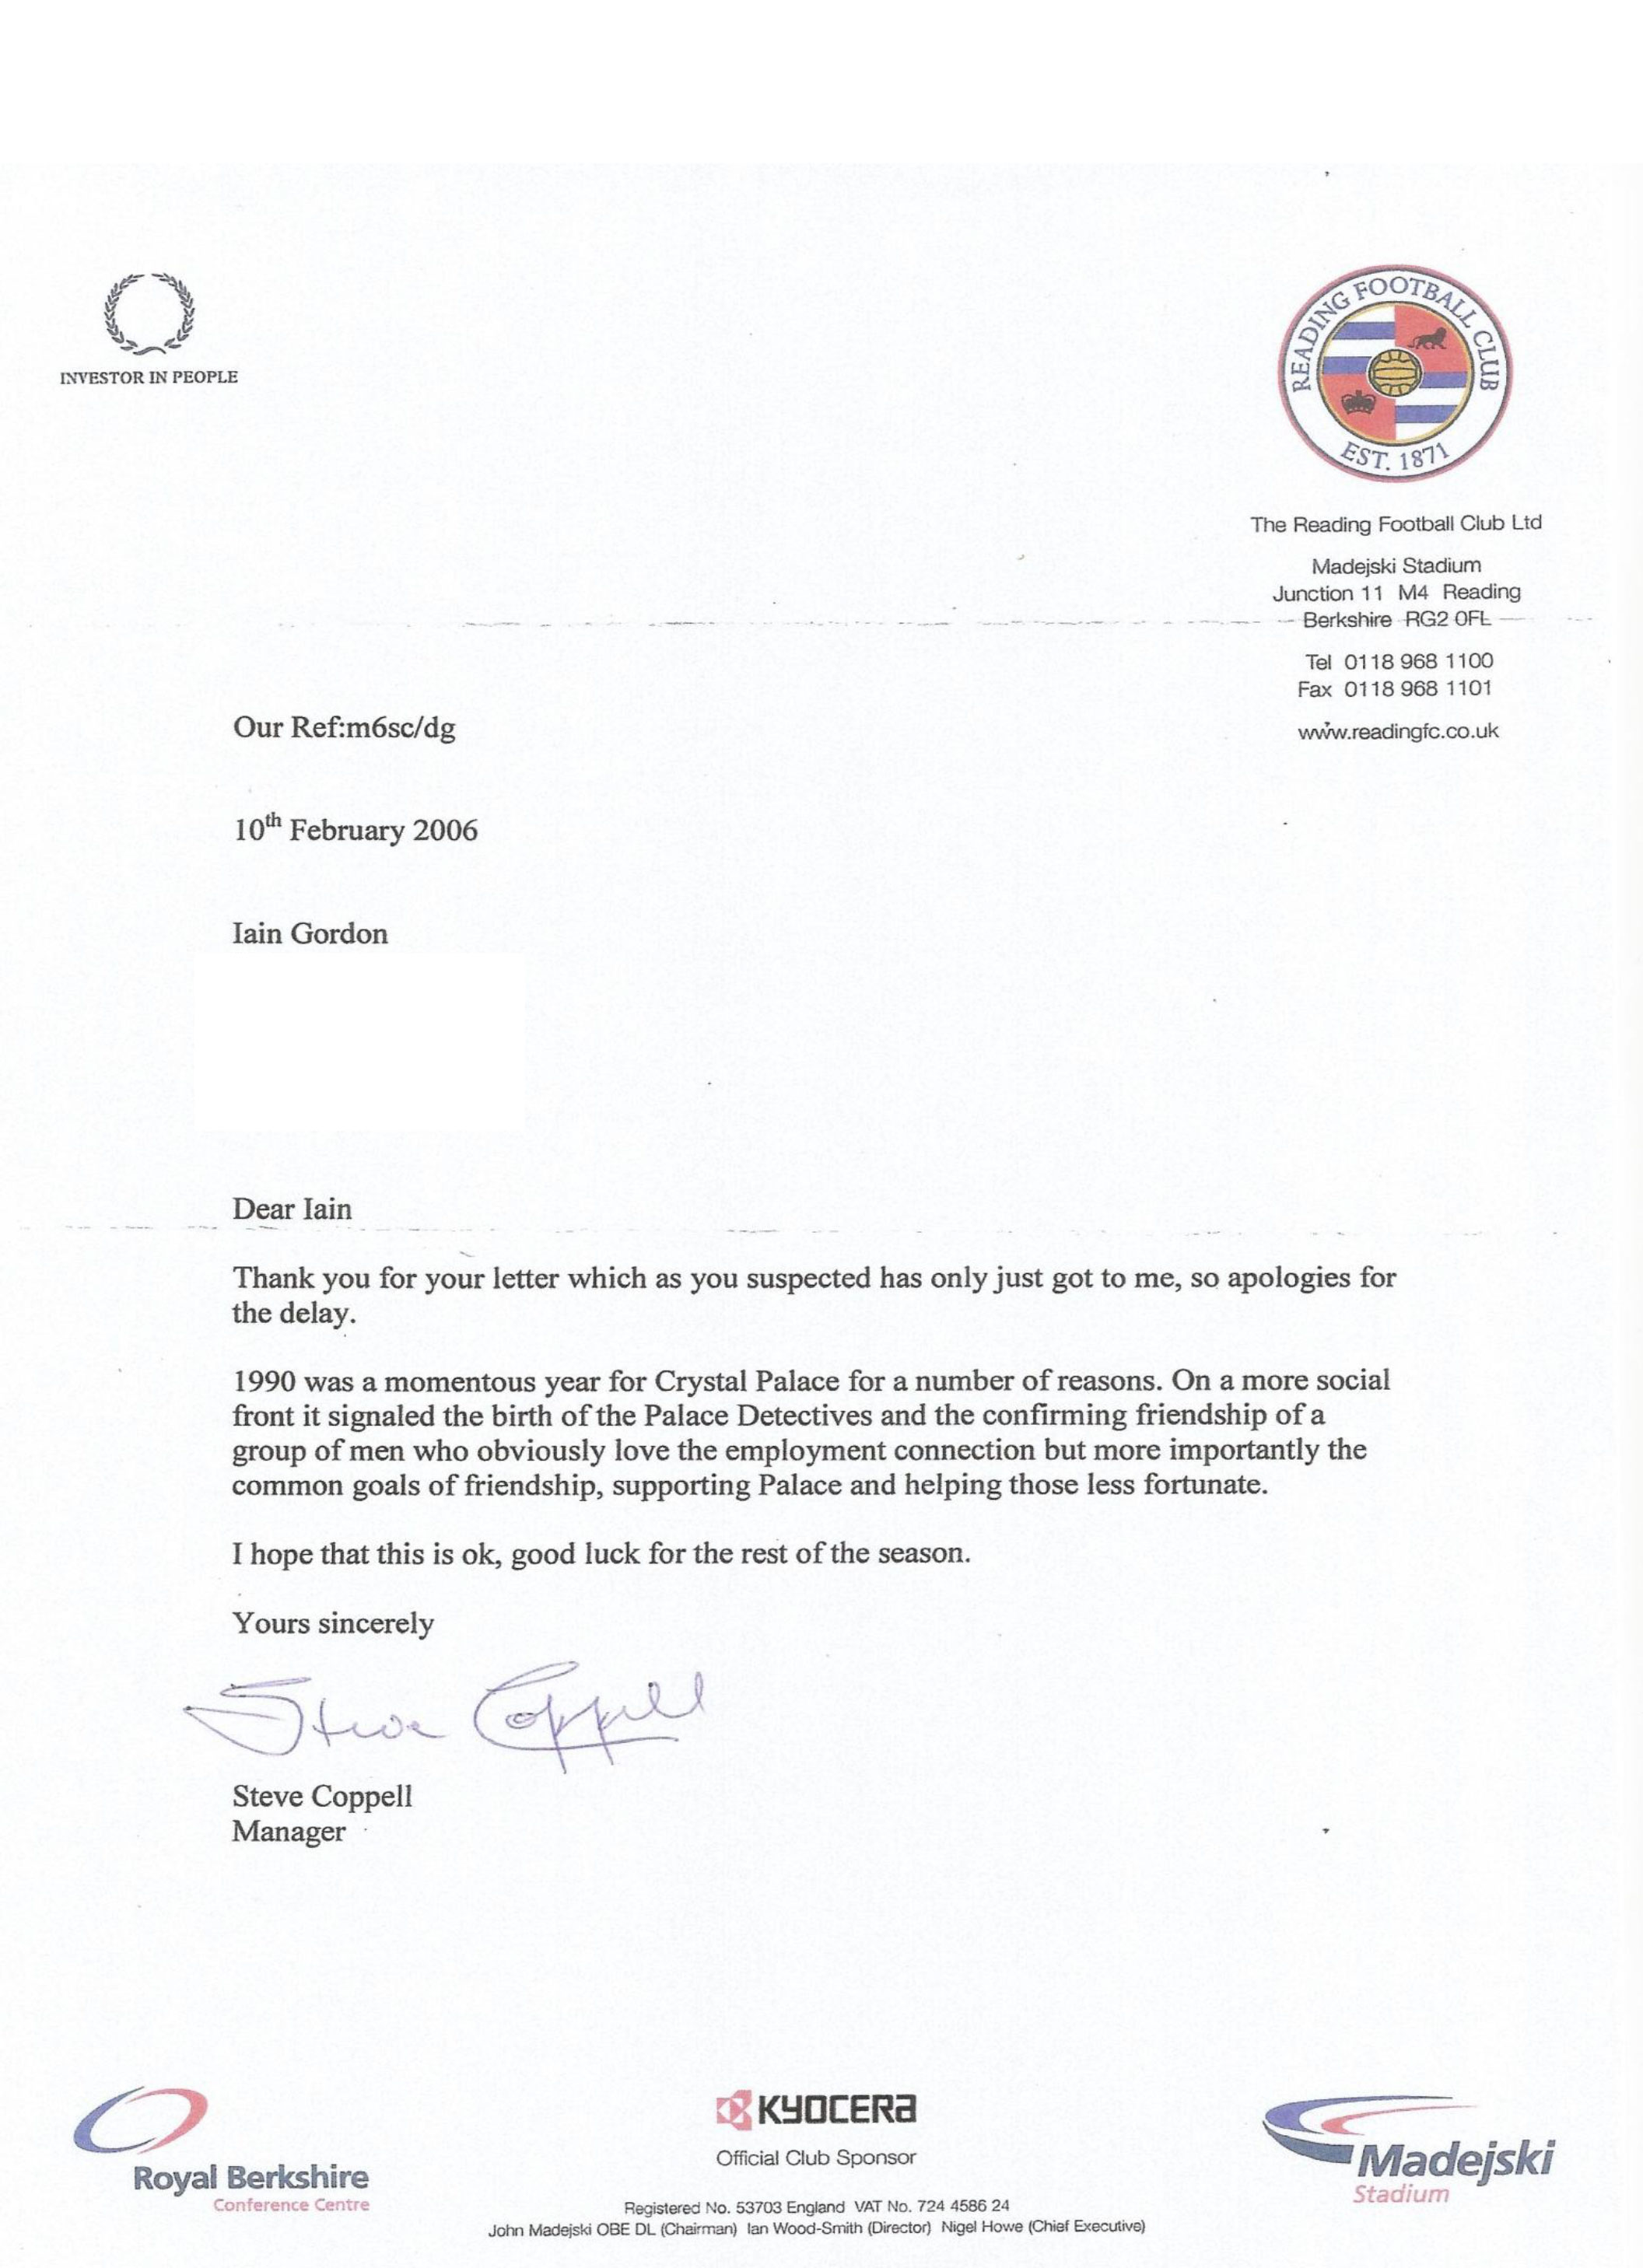 Reply from Steve Coppell 2006